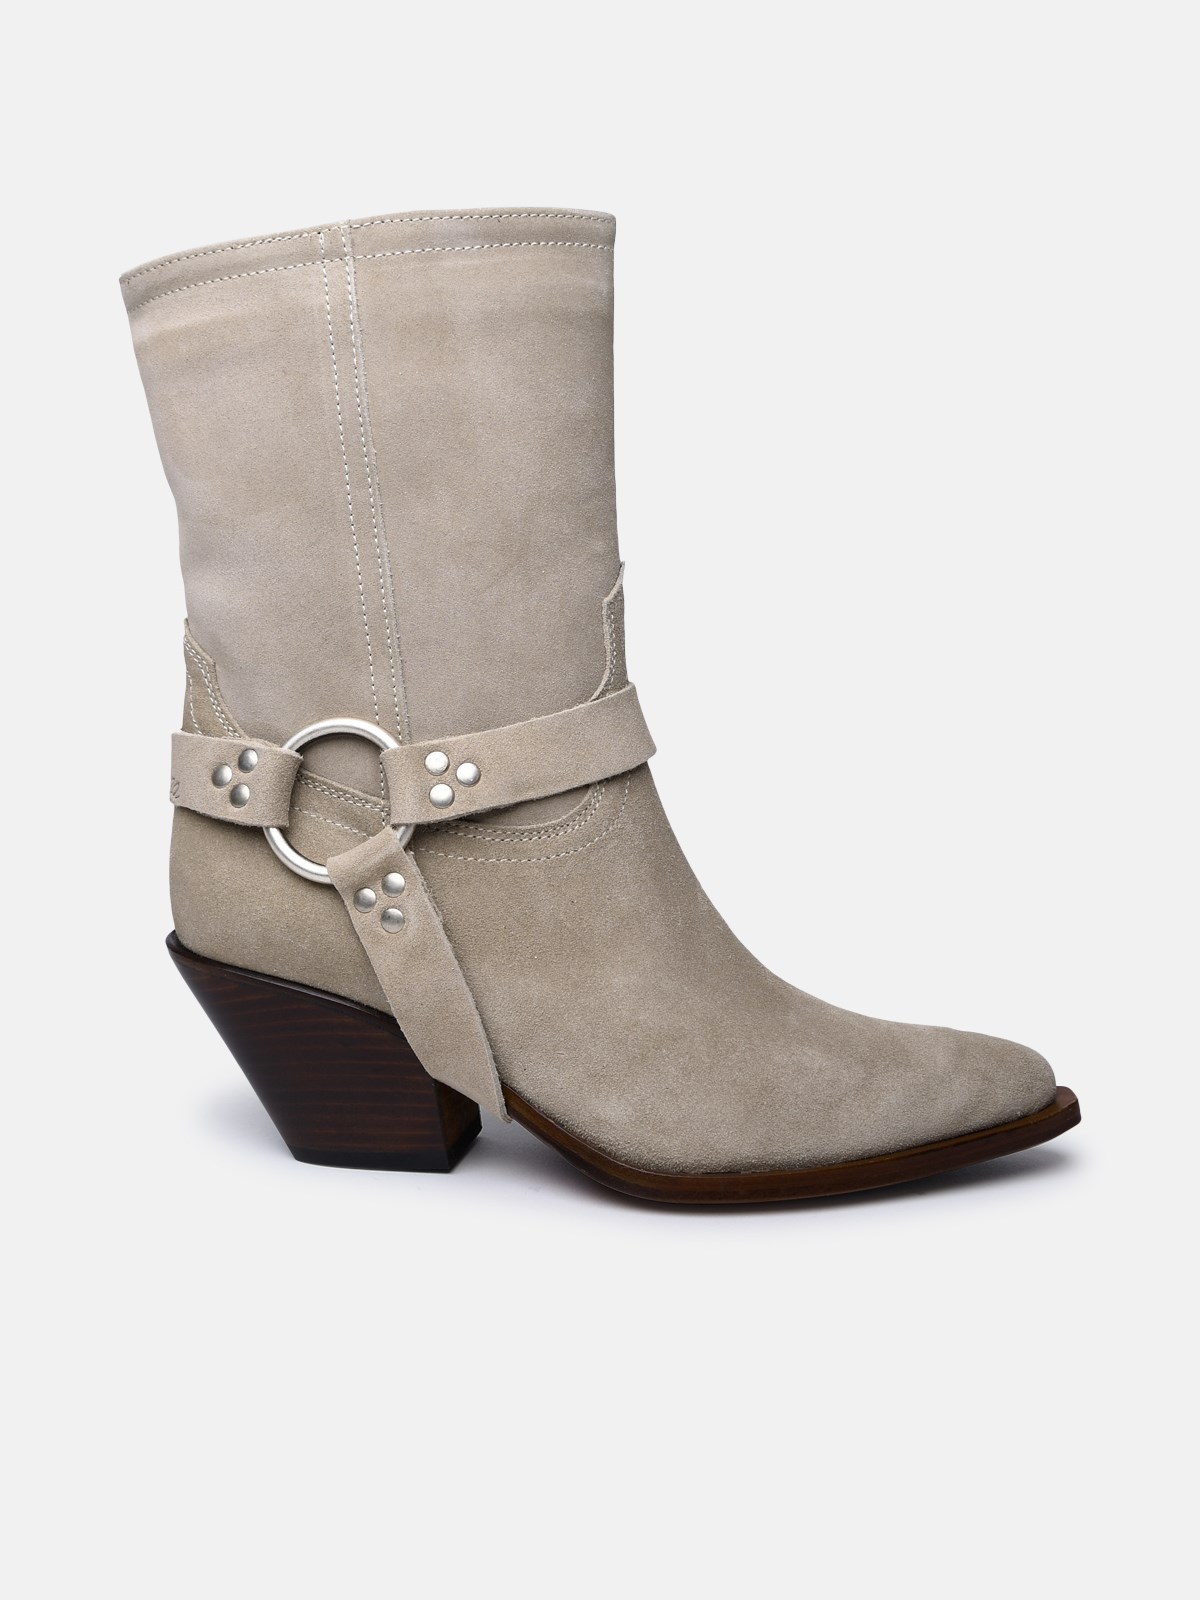 Sonora Beige Suede Ankle Boots